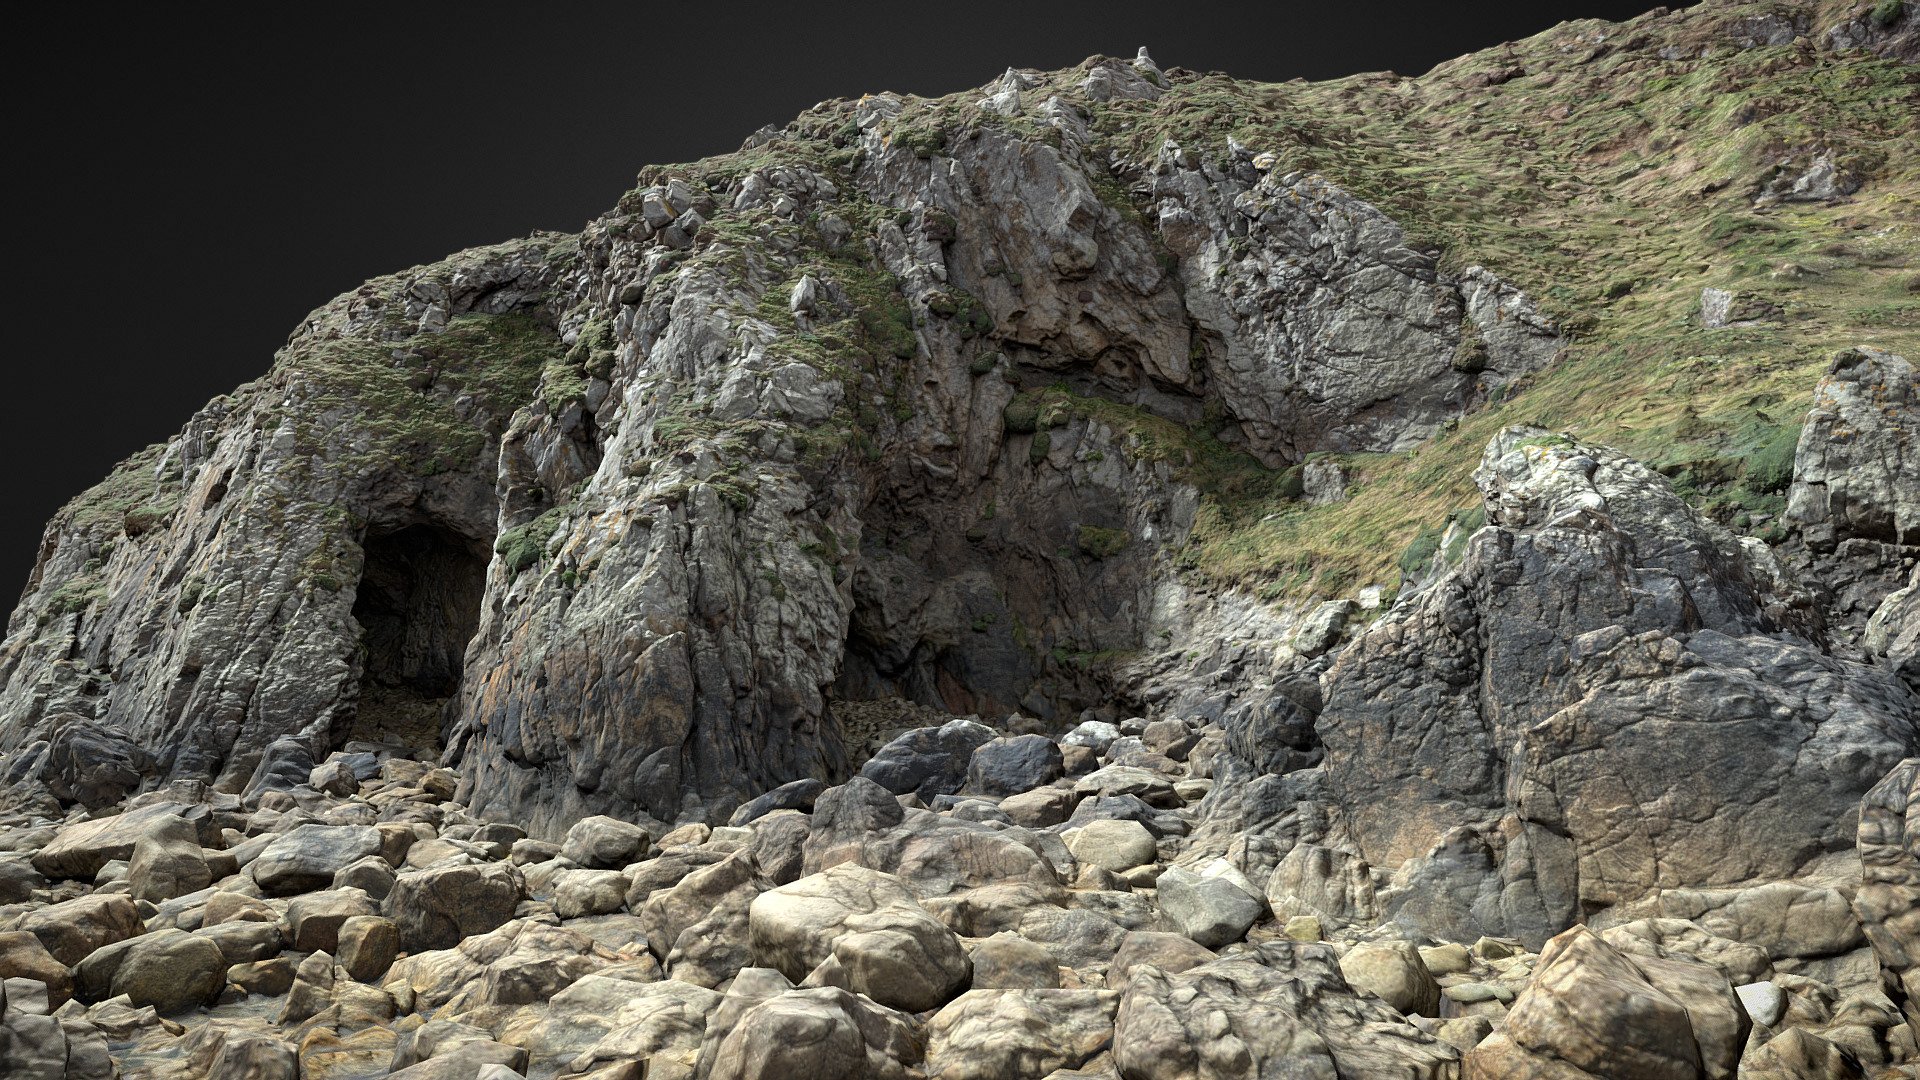 Captured in neutral lighting conditions. Feel free to rotate the lights.

Big Coastal Ocean Cliff Scan with up to 16K PBR textures: 




Albedo

Normal

Roughness

Displacement

Ambient Occlusion

Vegetation Scatter Mask

Rendered in Cycles with displacement + adaptive subdivions + vegetation:


Additional Files contain:




blender source file + packed textures

.fbx

.obj

textures 16k

Please let me know if something is not working as it should 3d model